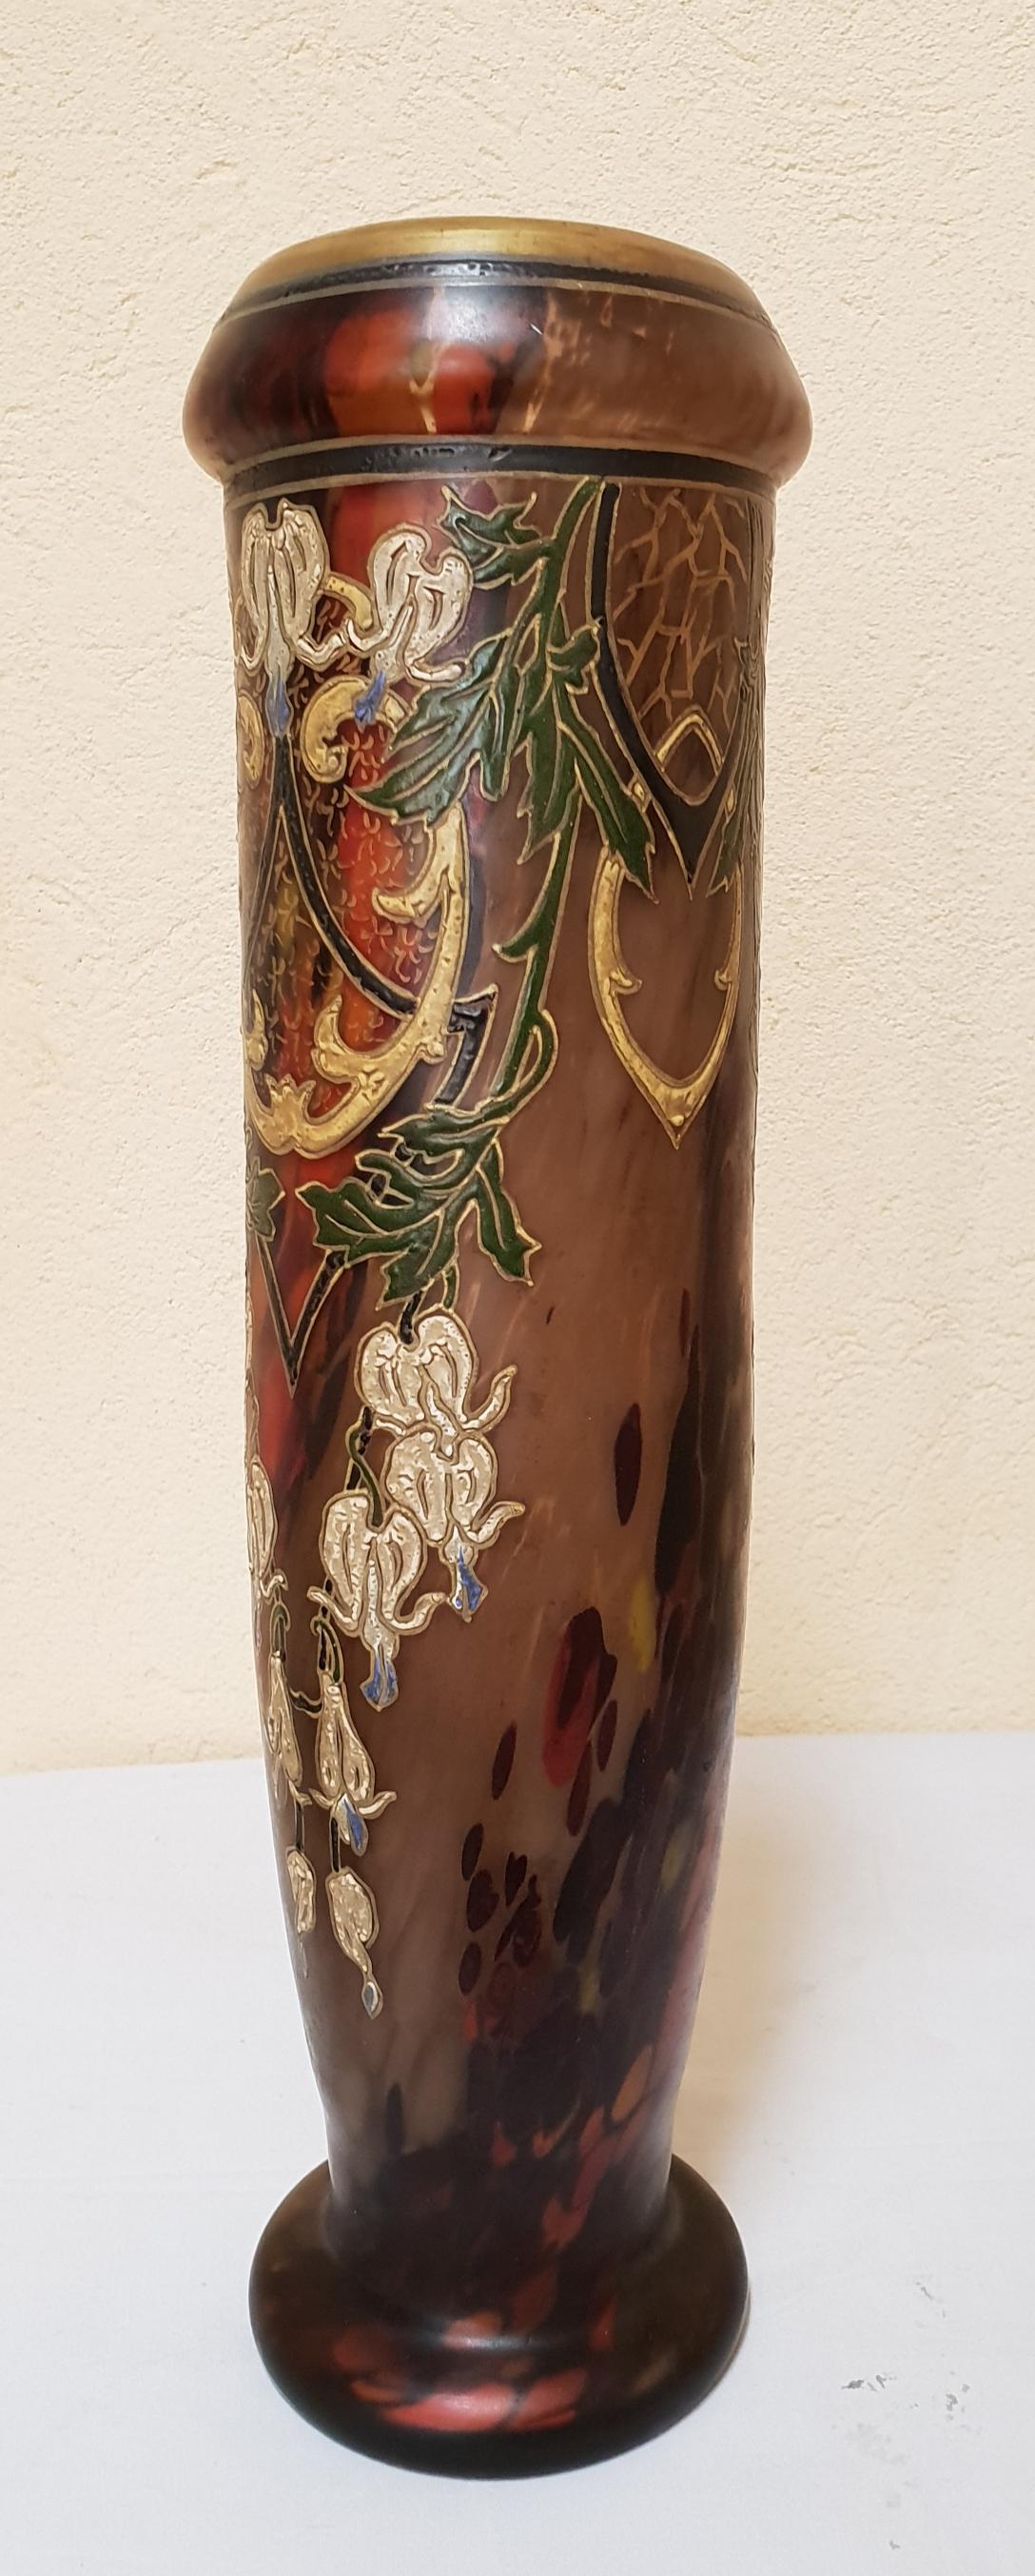 Glass Arabian Vase marbled background with a multitude of colors fused together in an arabesque motif.
Signed.

Legras was the first French artist  used this type of Arabic decoration in his production, which it was later resumed,  due to the great